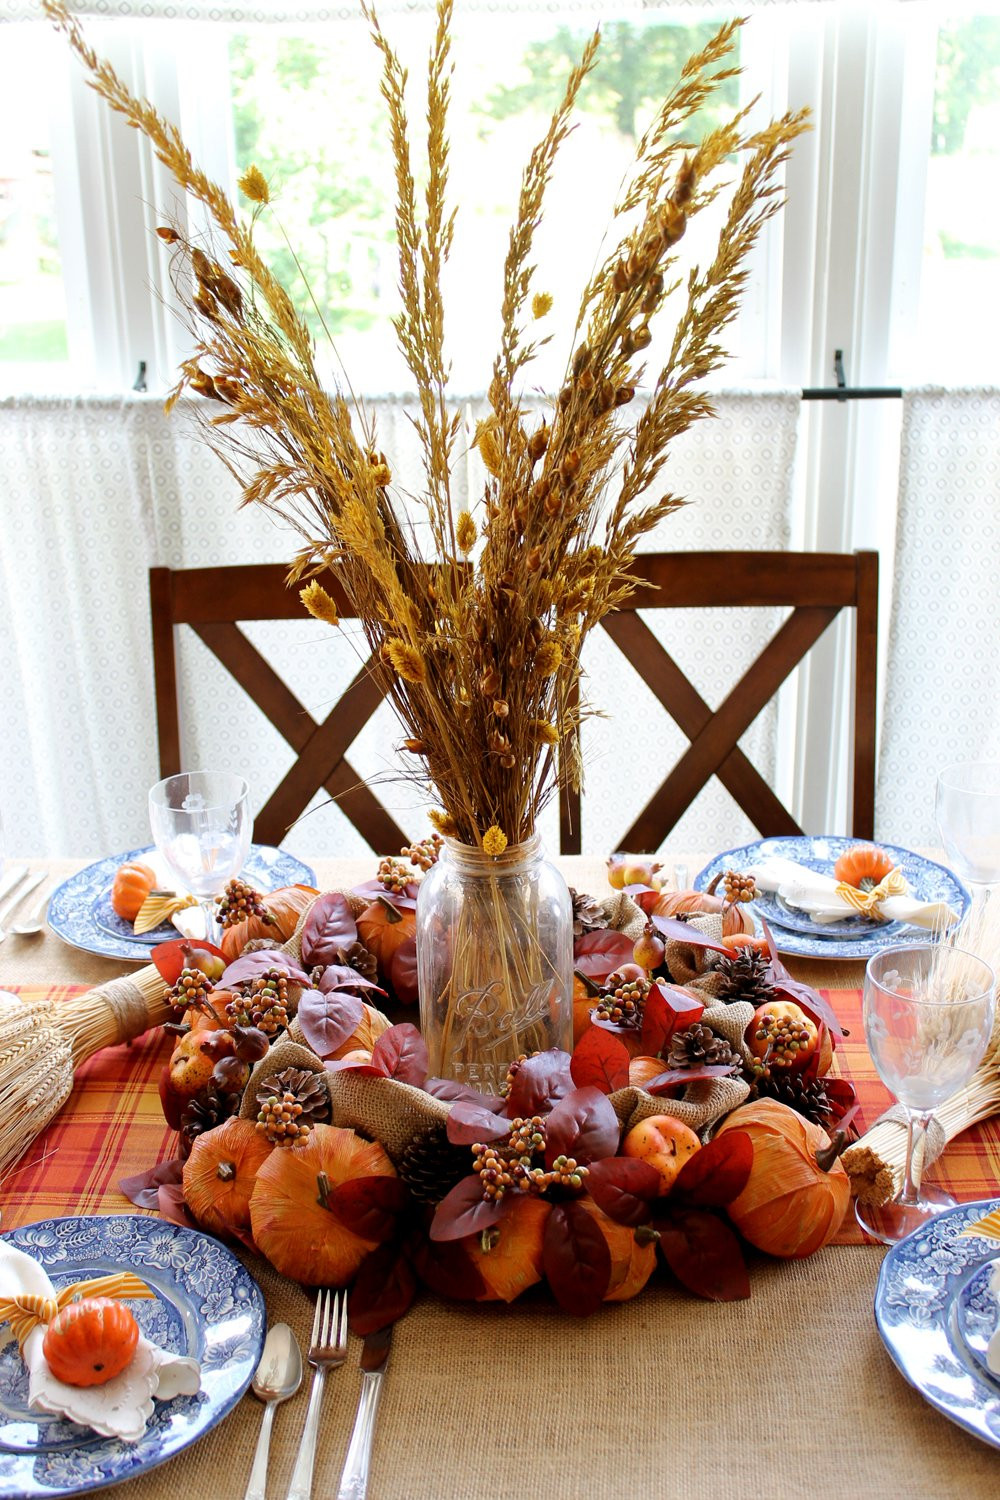 Simple Thanksgiving Table Decorations
 DIY Thanksgiving Decorations for Your Table The Country